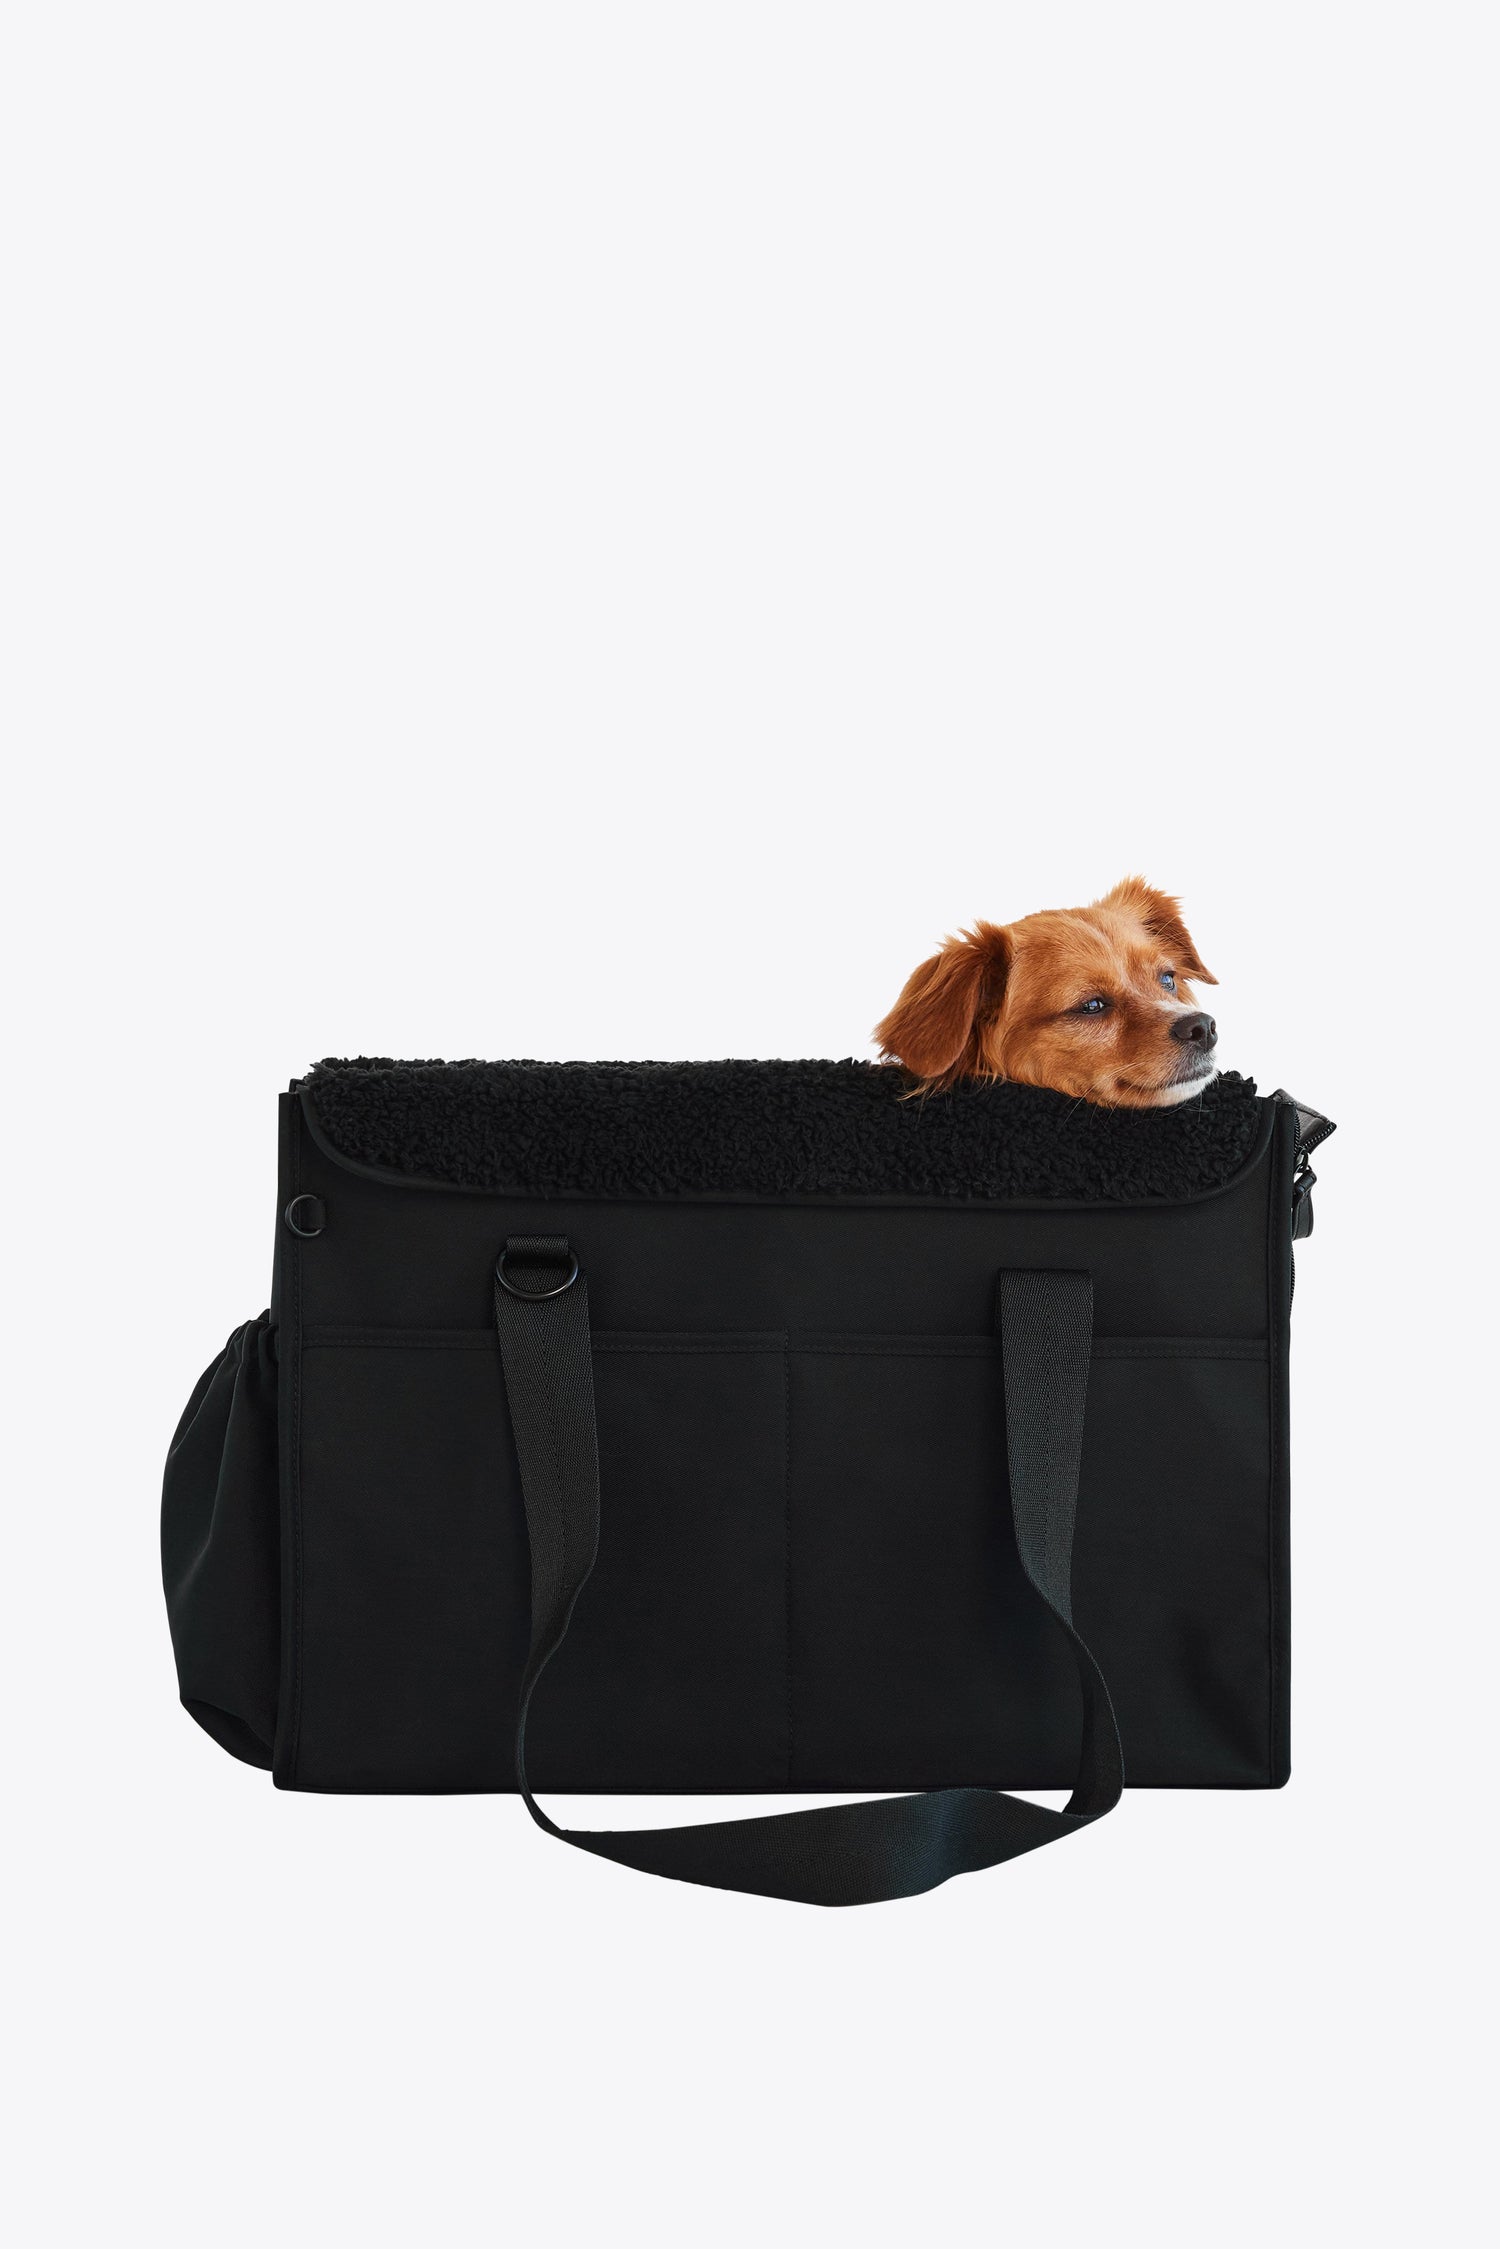 Pet Travel Carriers & Accessories